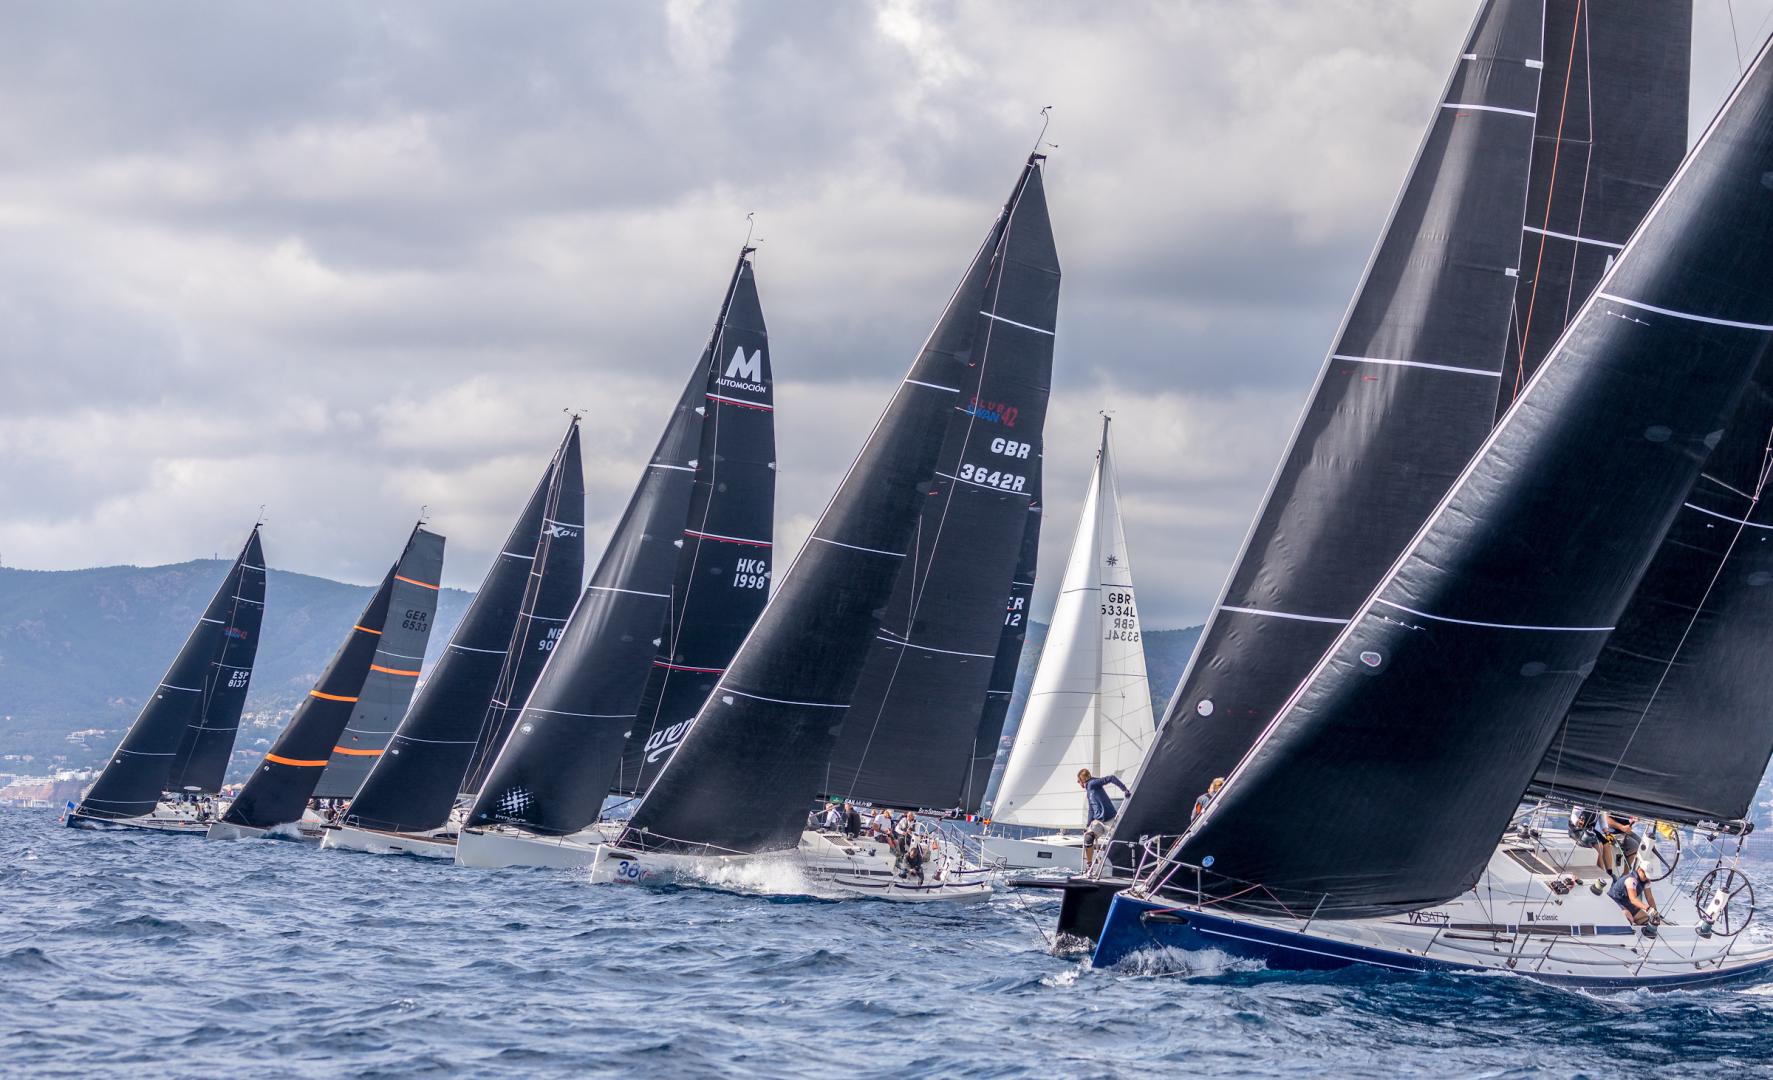 No tricks as bay of Palma delivers strong breeze for PalmaVela finale